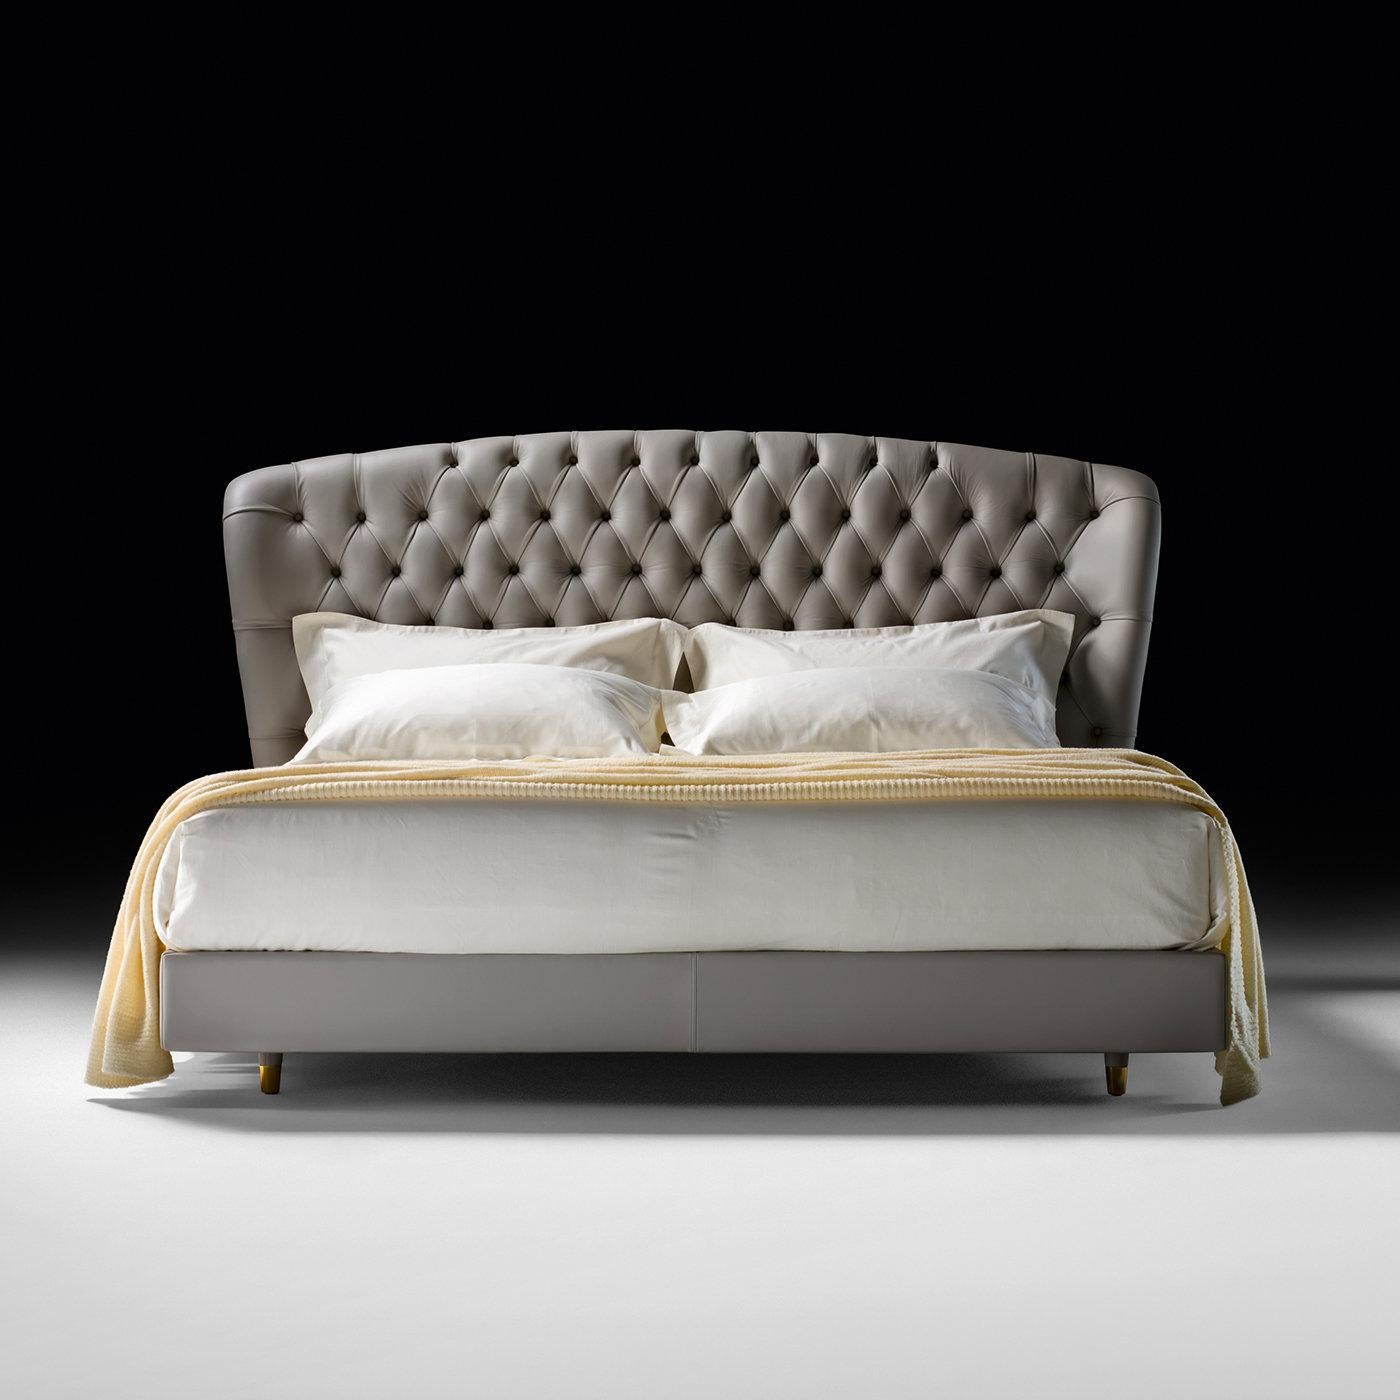 This bed boasts an elegant gray color and a majestic silhouette. An example of impeccable craftsmanship, the poplar wood frame is entirely padded with multi-density and highly-resistant polyurethane covered with thermo-bonded fiber and flexible